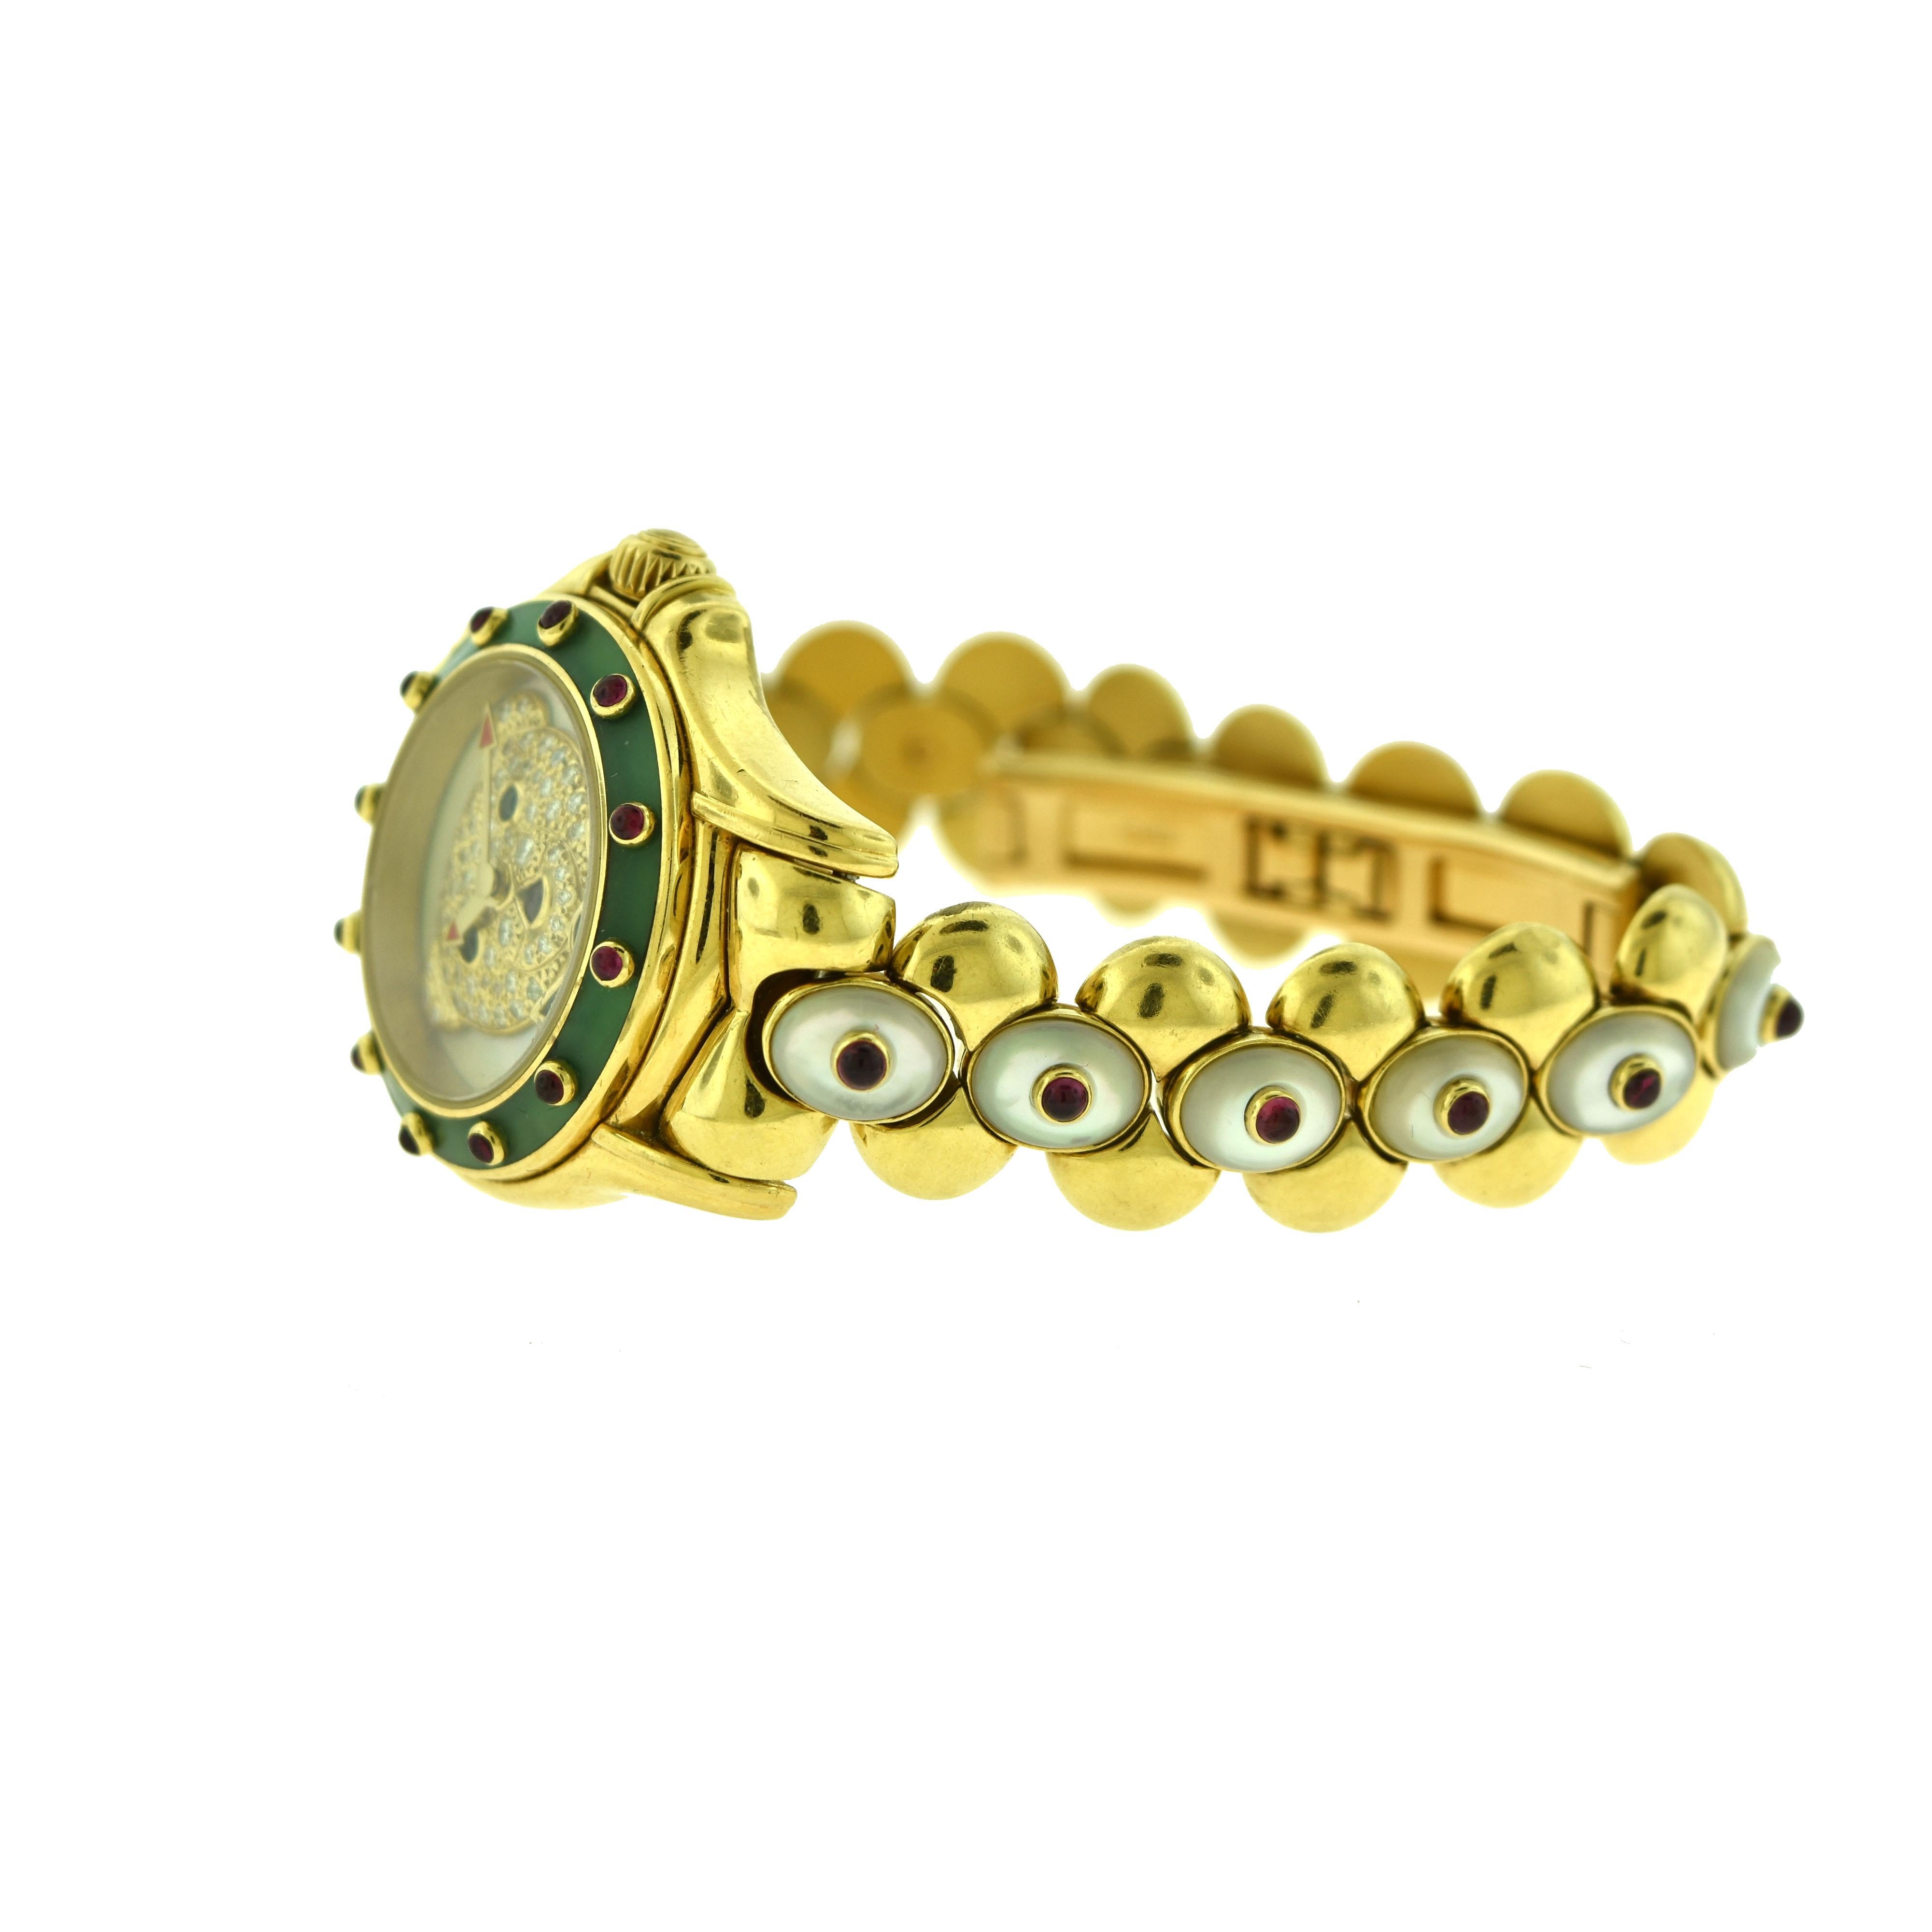 Brilliance Jewels, Miami
Questions? Call Us Anytime!
786,482,8100

Designer: Mauboussin

Reference No.: R.64680

Style: Wrist Watch Watch
Metal: Yellow Gold 

Metal Purity: 18k
Movement: Quartz 

Case Material: 18k Yellow Gold

Bezel Material: